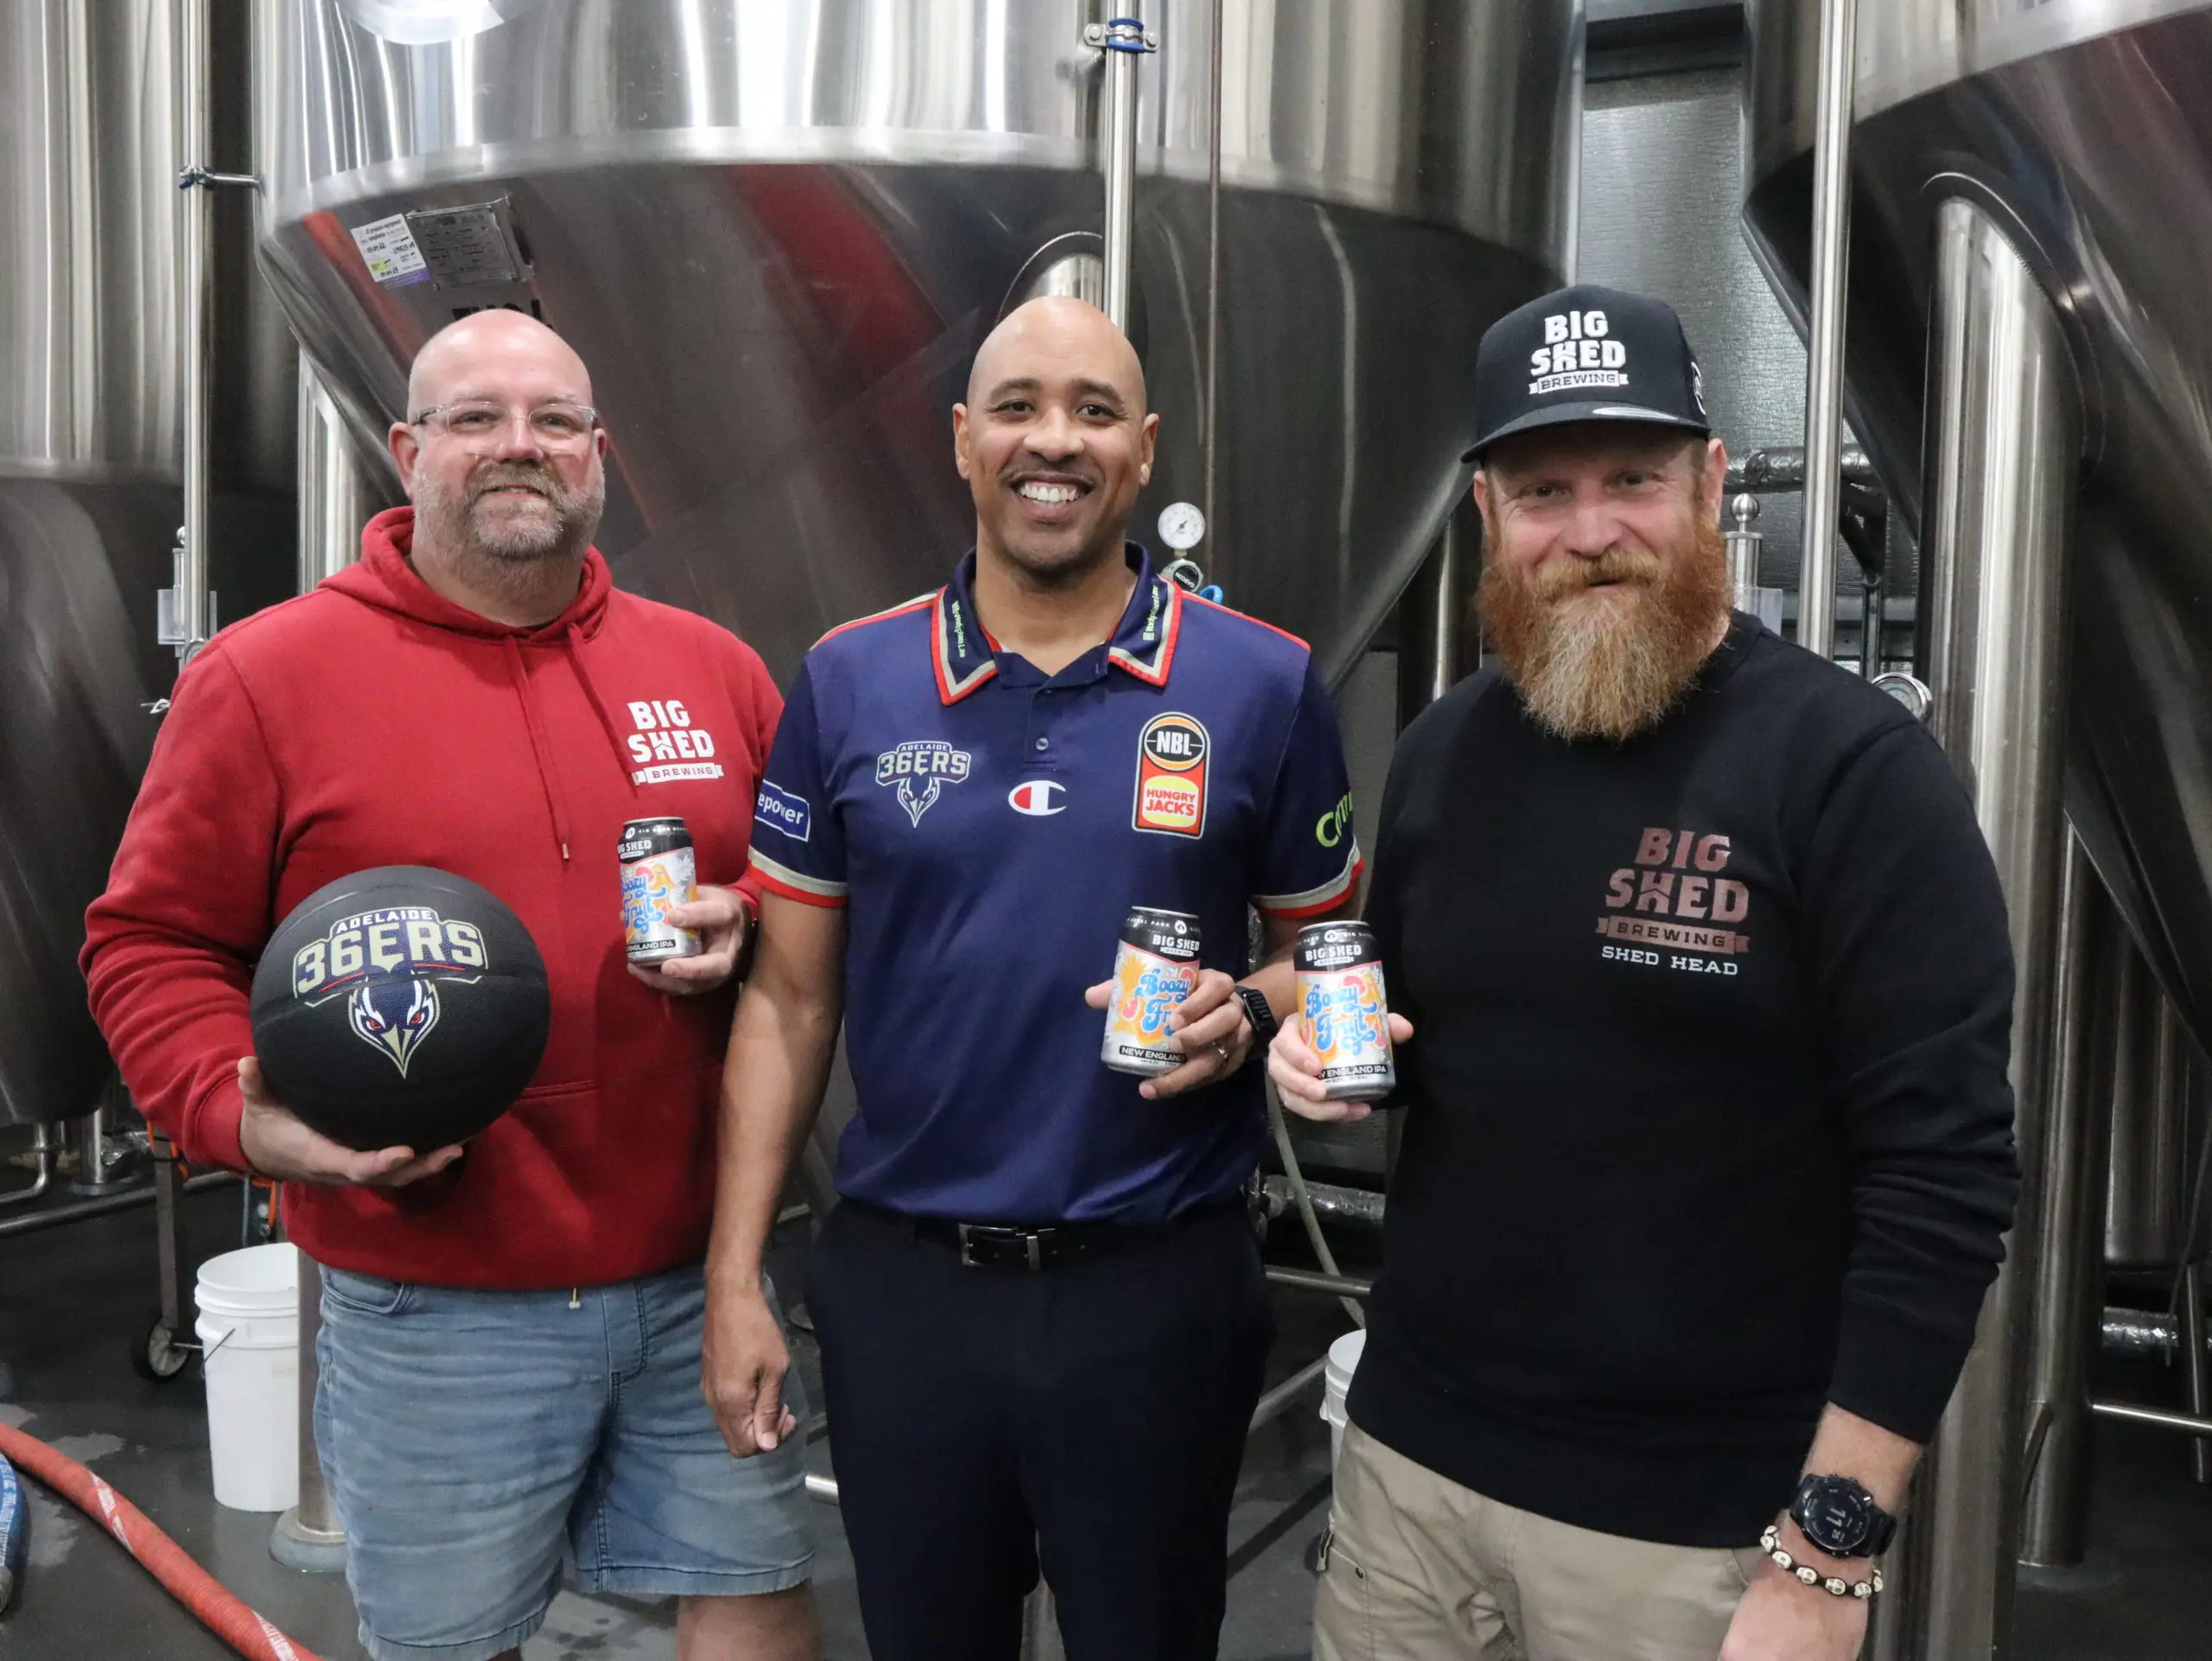 Big Shed Brewing - adelaide 36ers